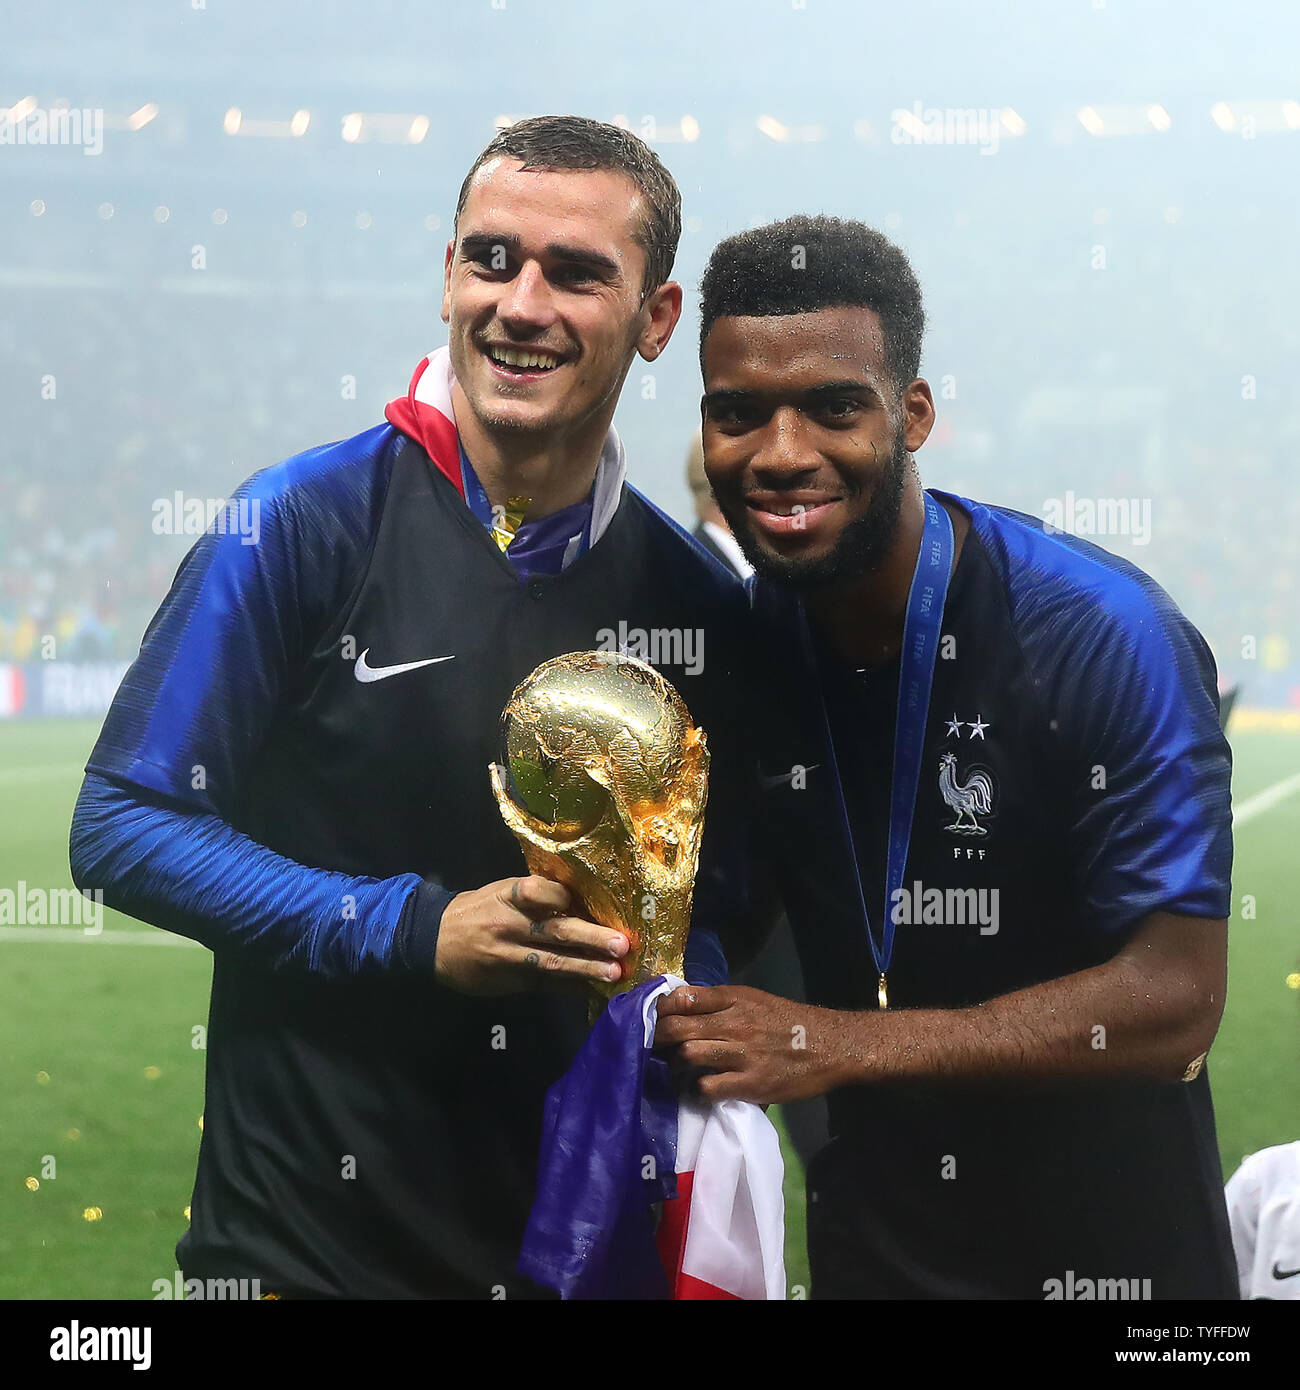 Antoine Griezmann (L) and Thomas Lemar of France celebrate with the trophy following the 2018 FIFA World Cup final match at Luzhniki Stadium in Moscow, Russia on July 15, 2018